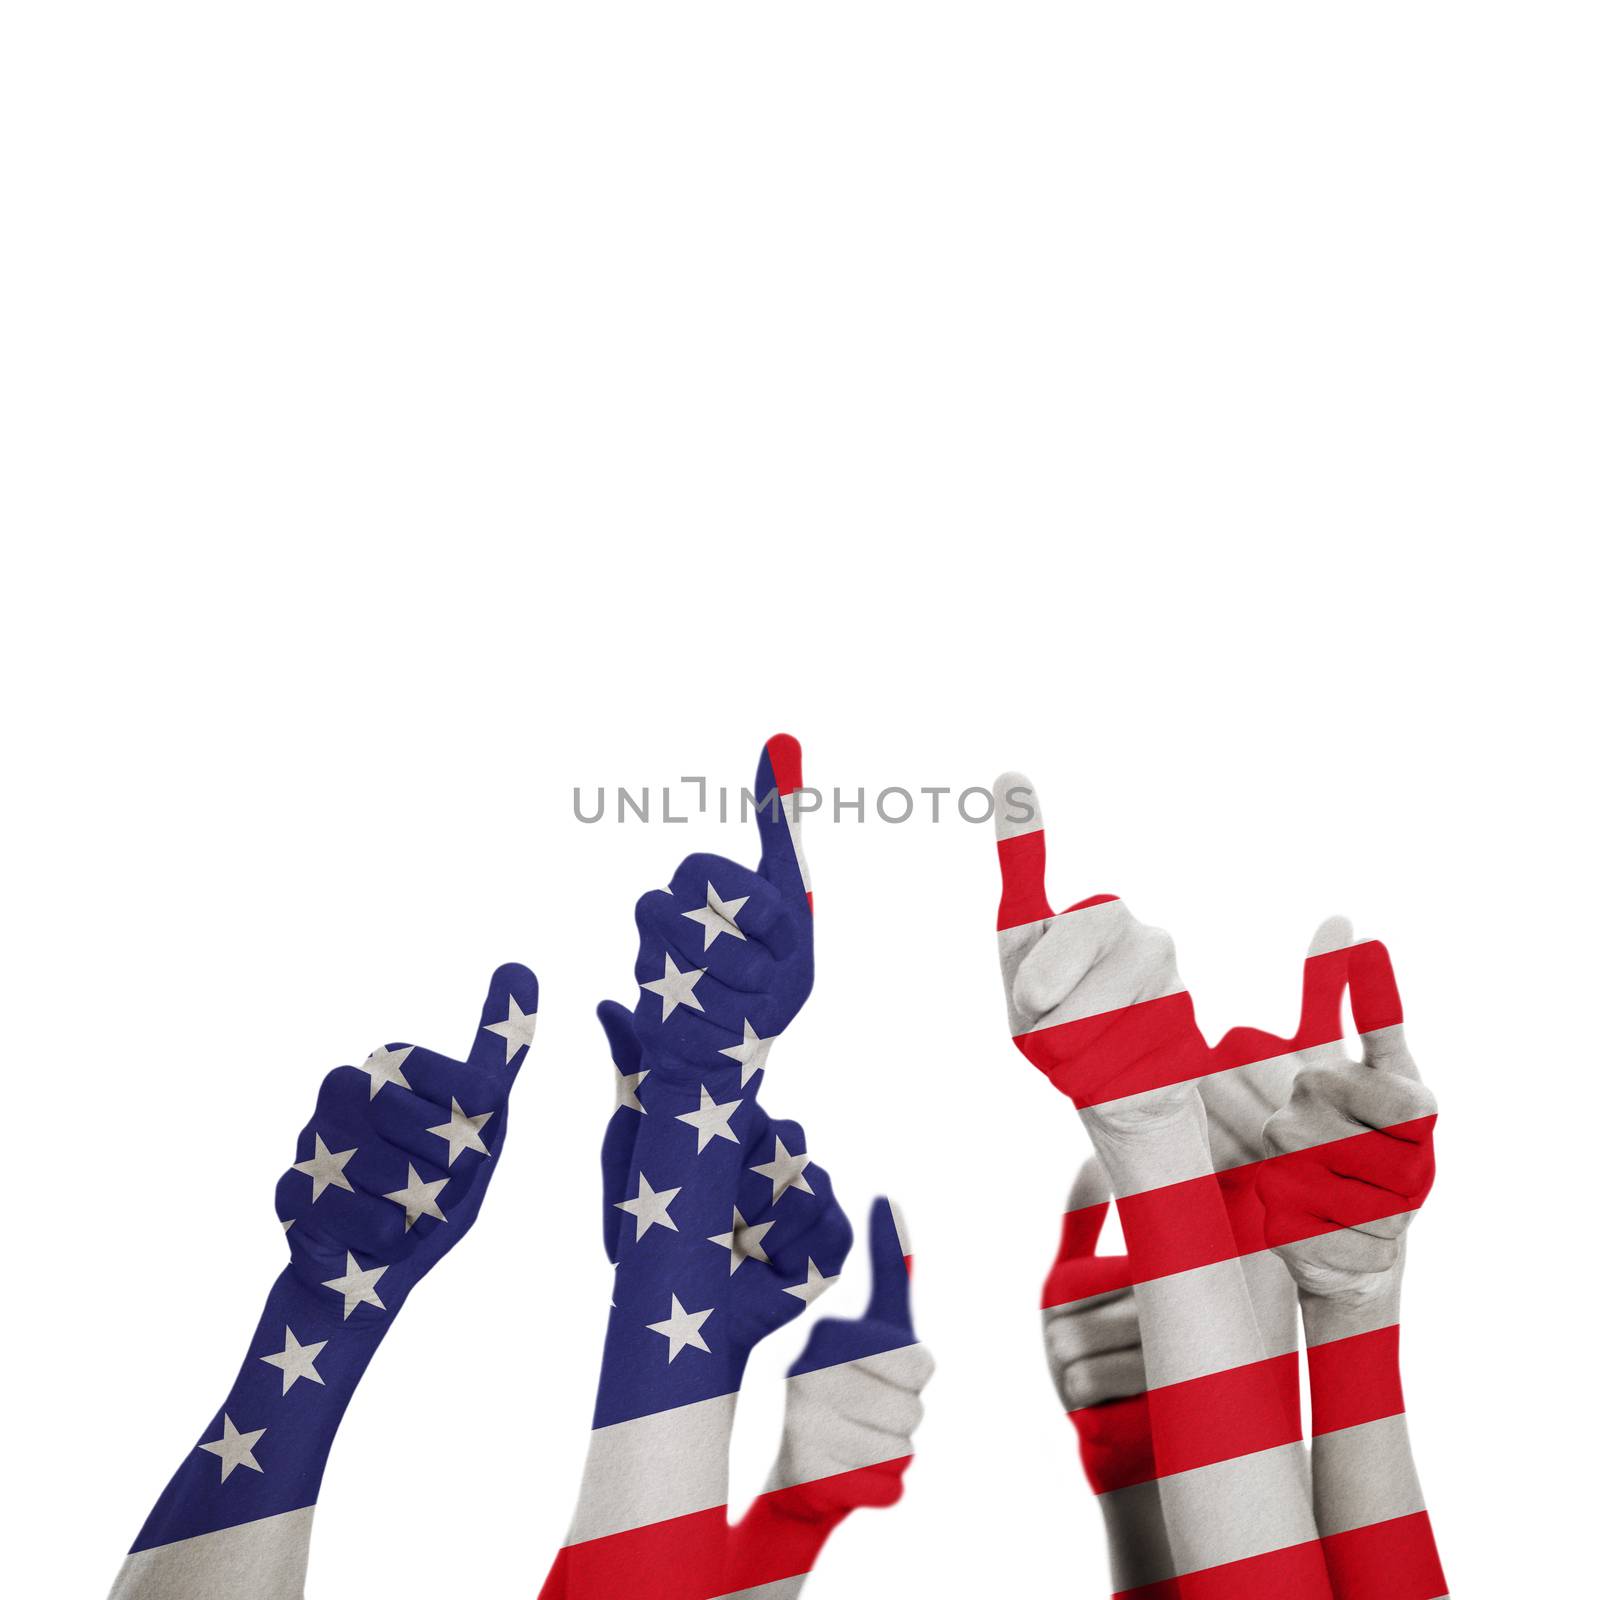 Composite image of hands up and thumbs raised by Wavebreakmedia